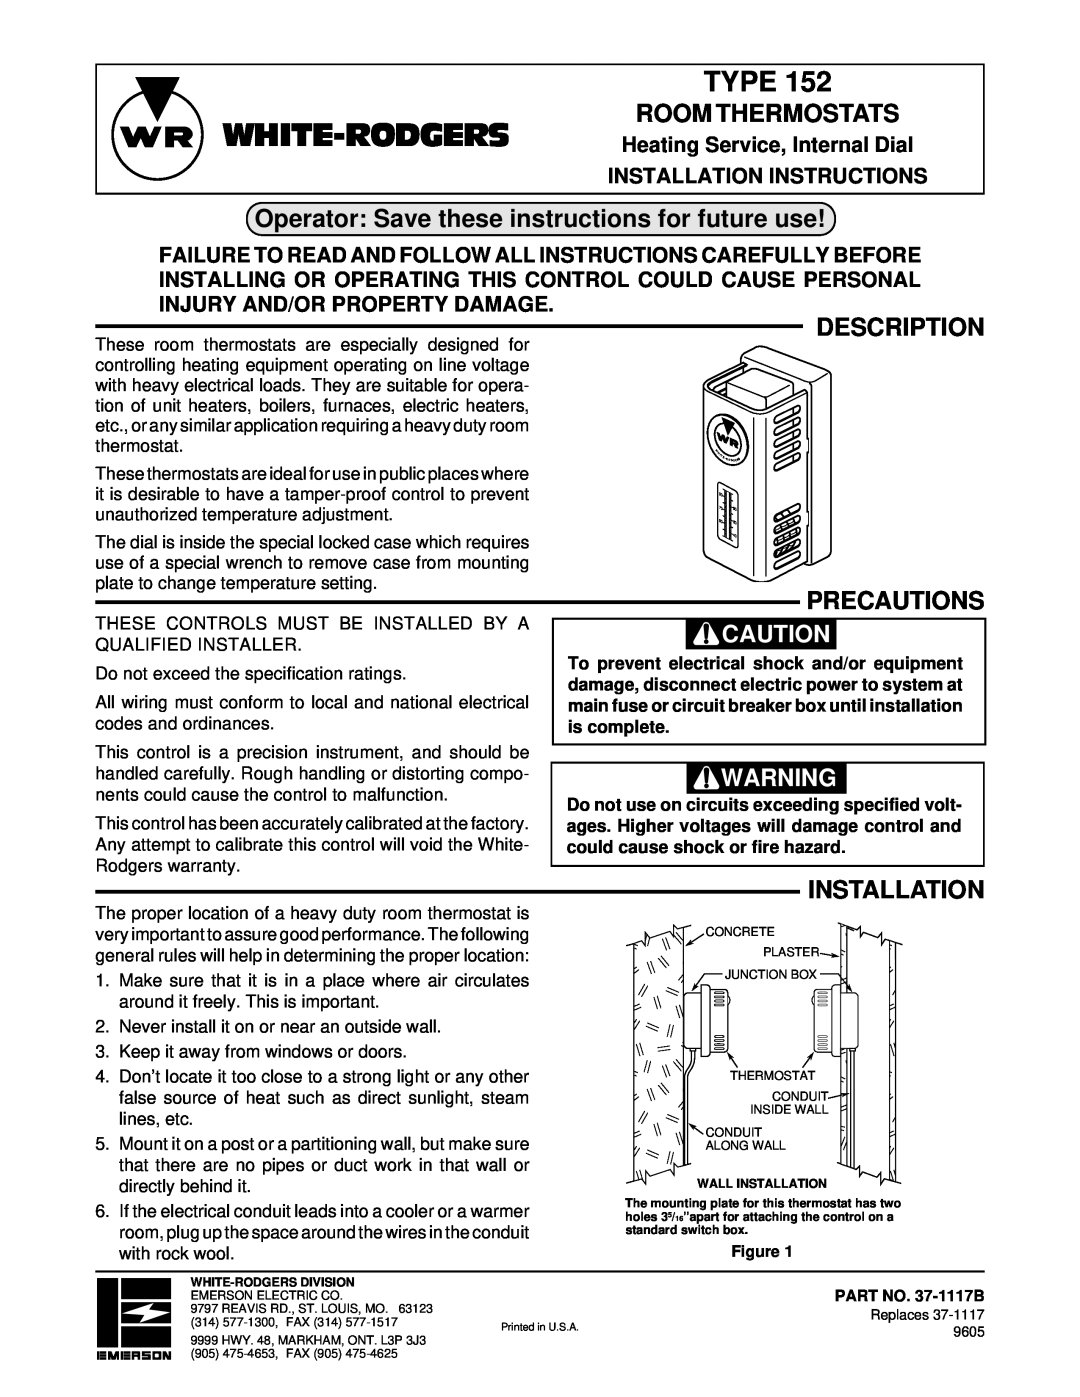 White Rodgers TYPE 152 installation instructions Type, Room Thermostats, Operator Save these instructions for future use 